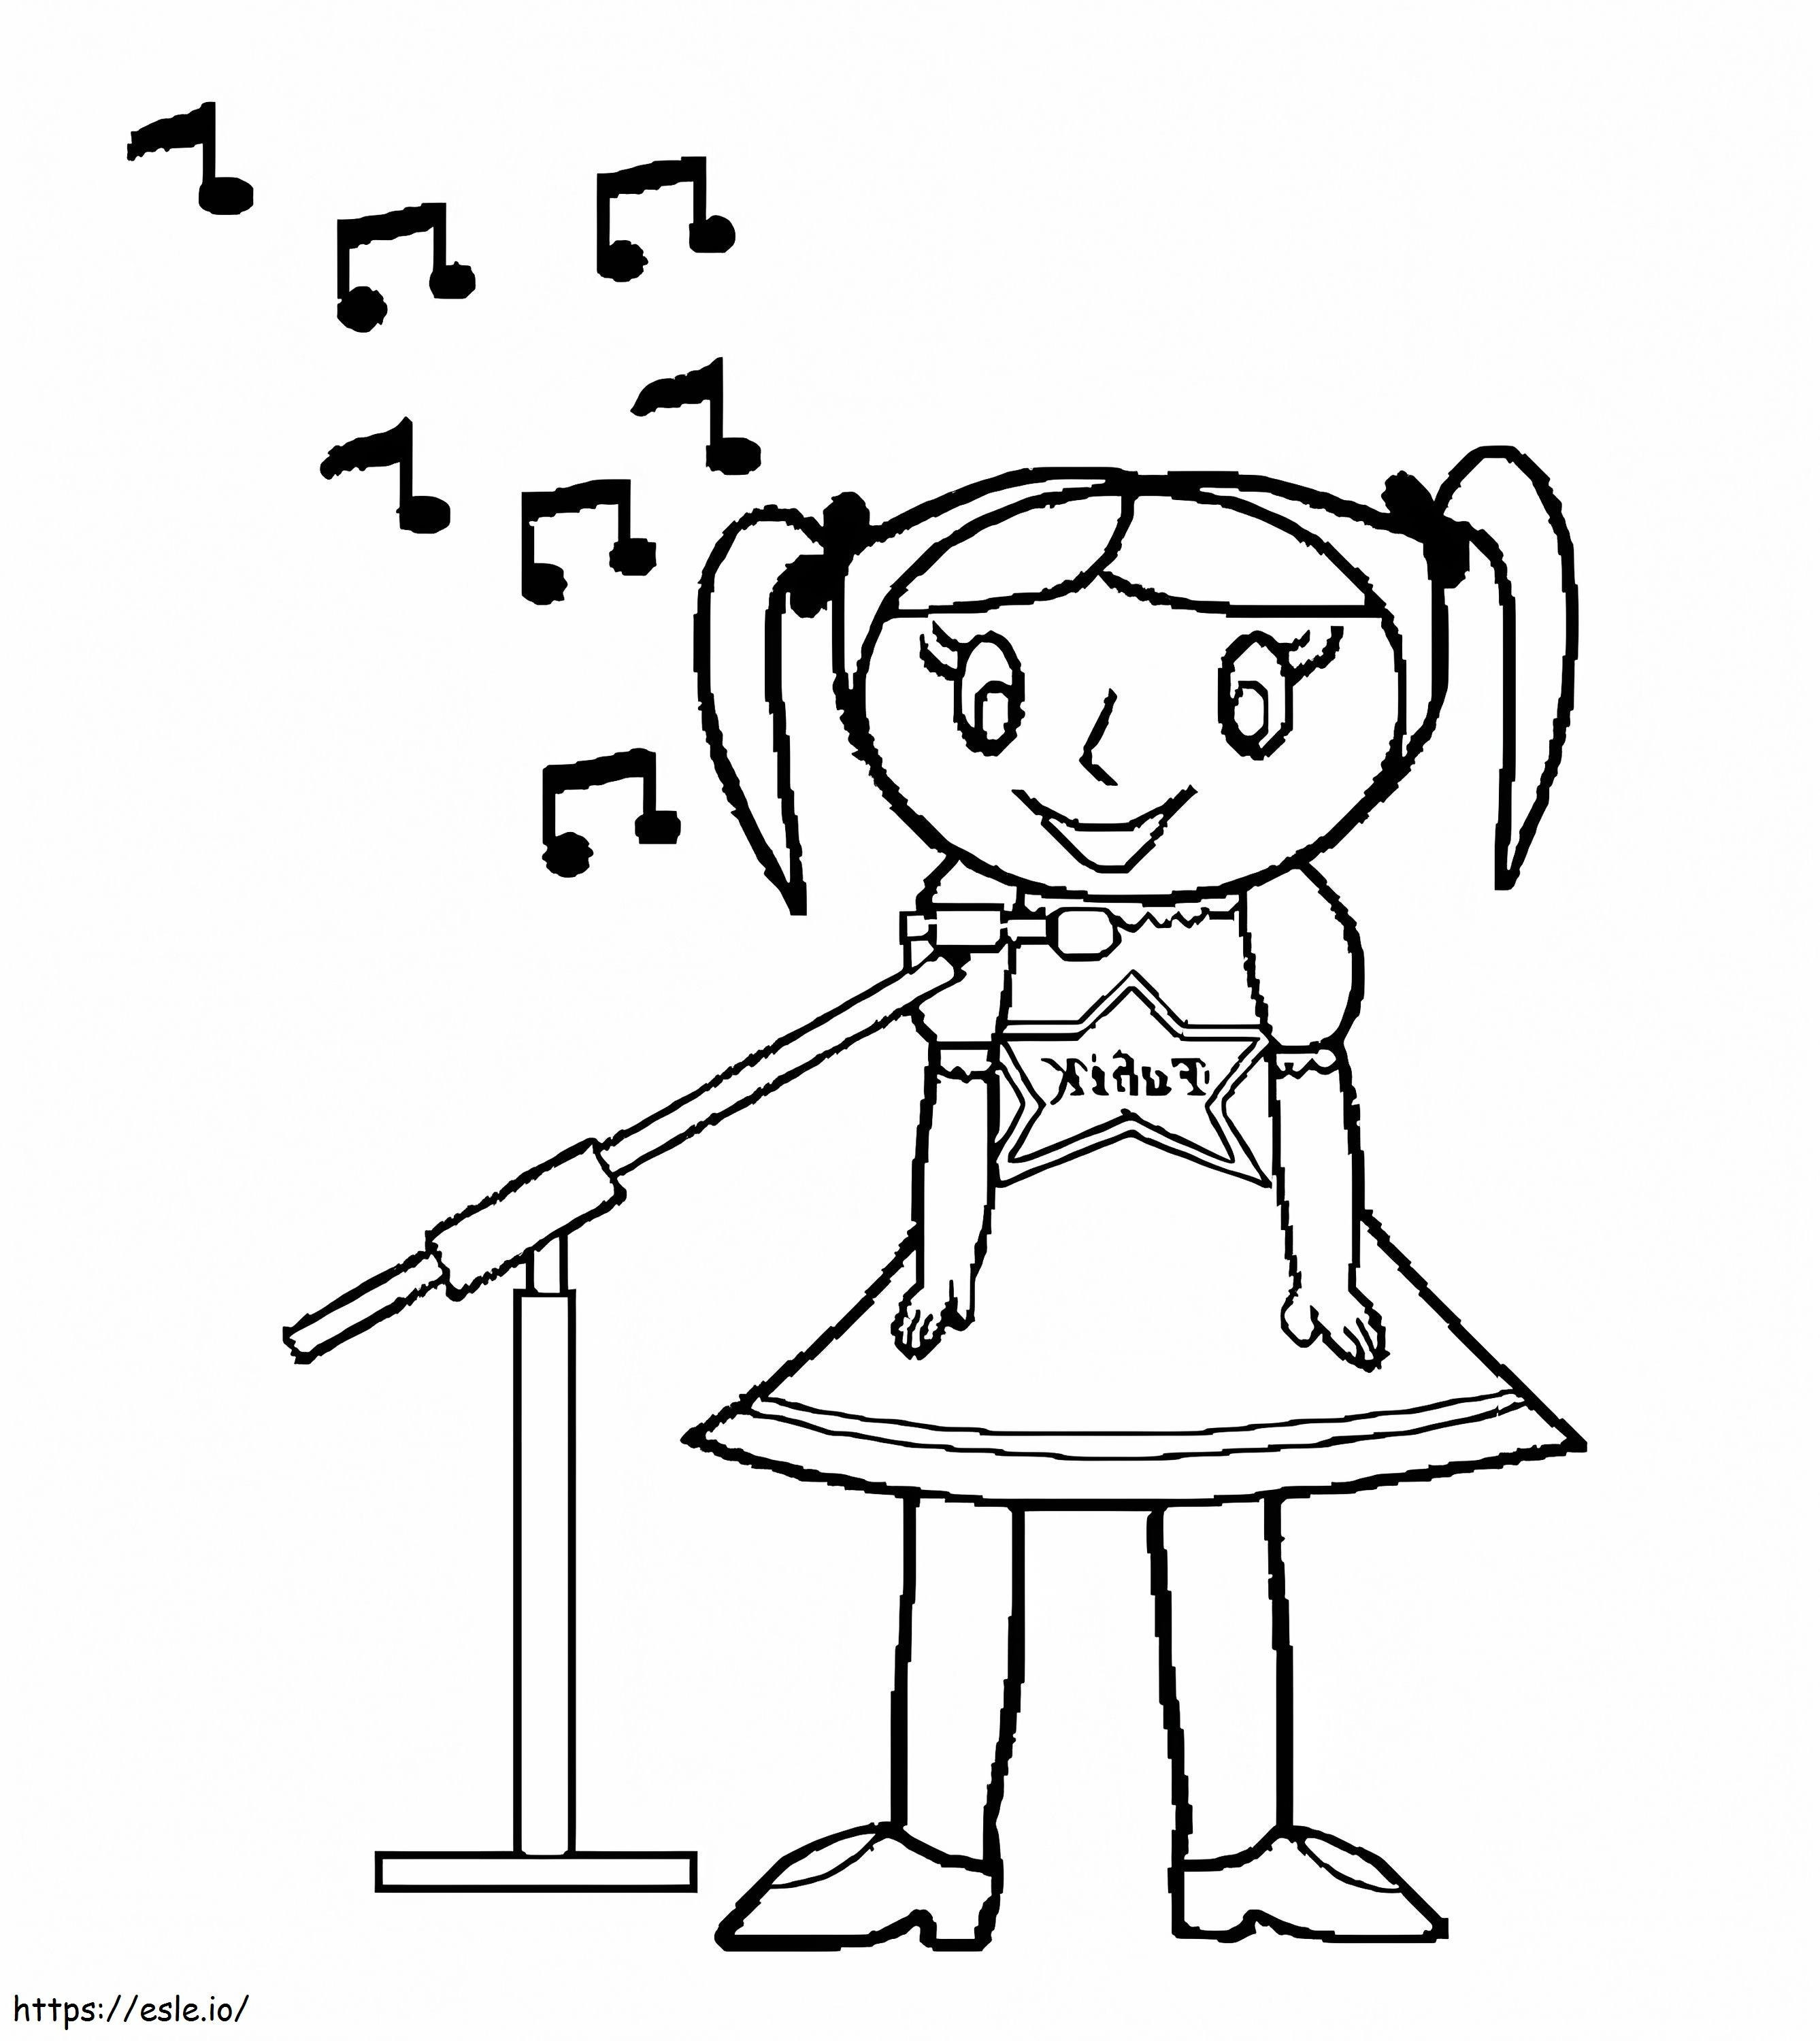 A Cute Singer coloring page